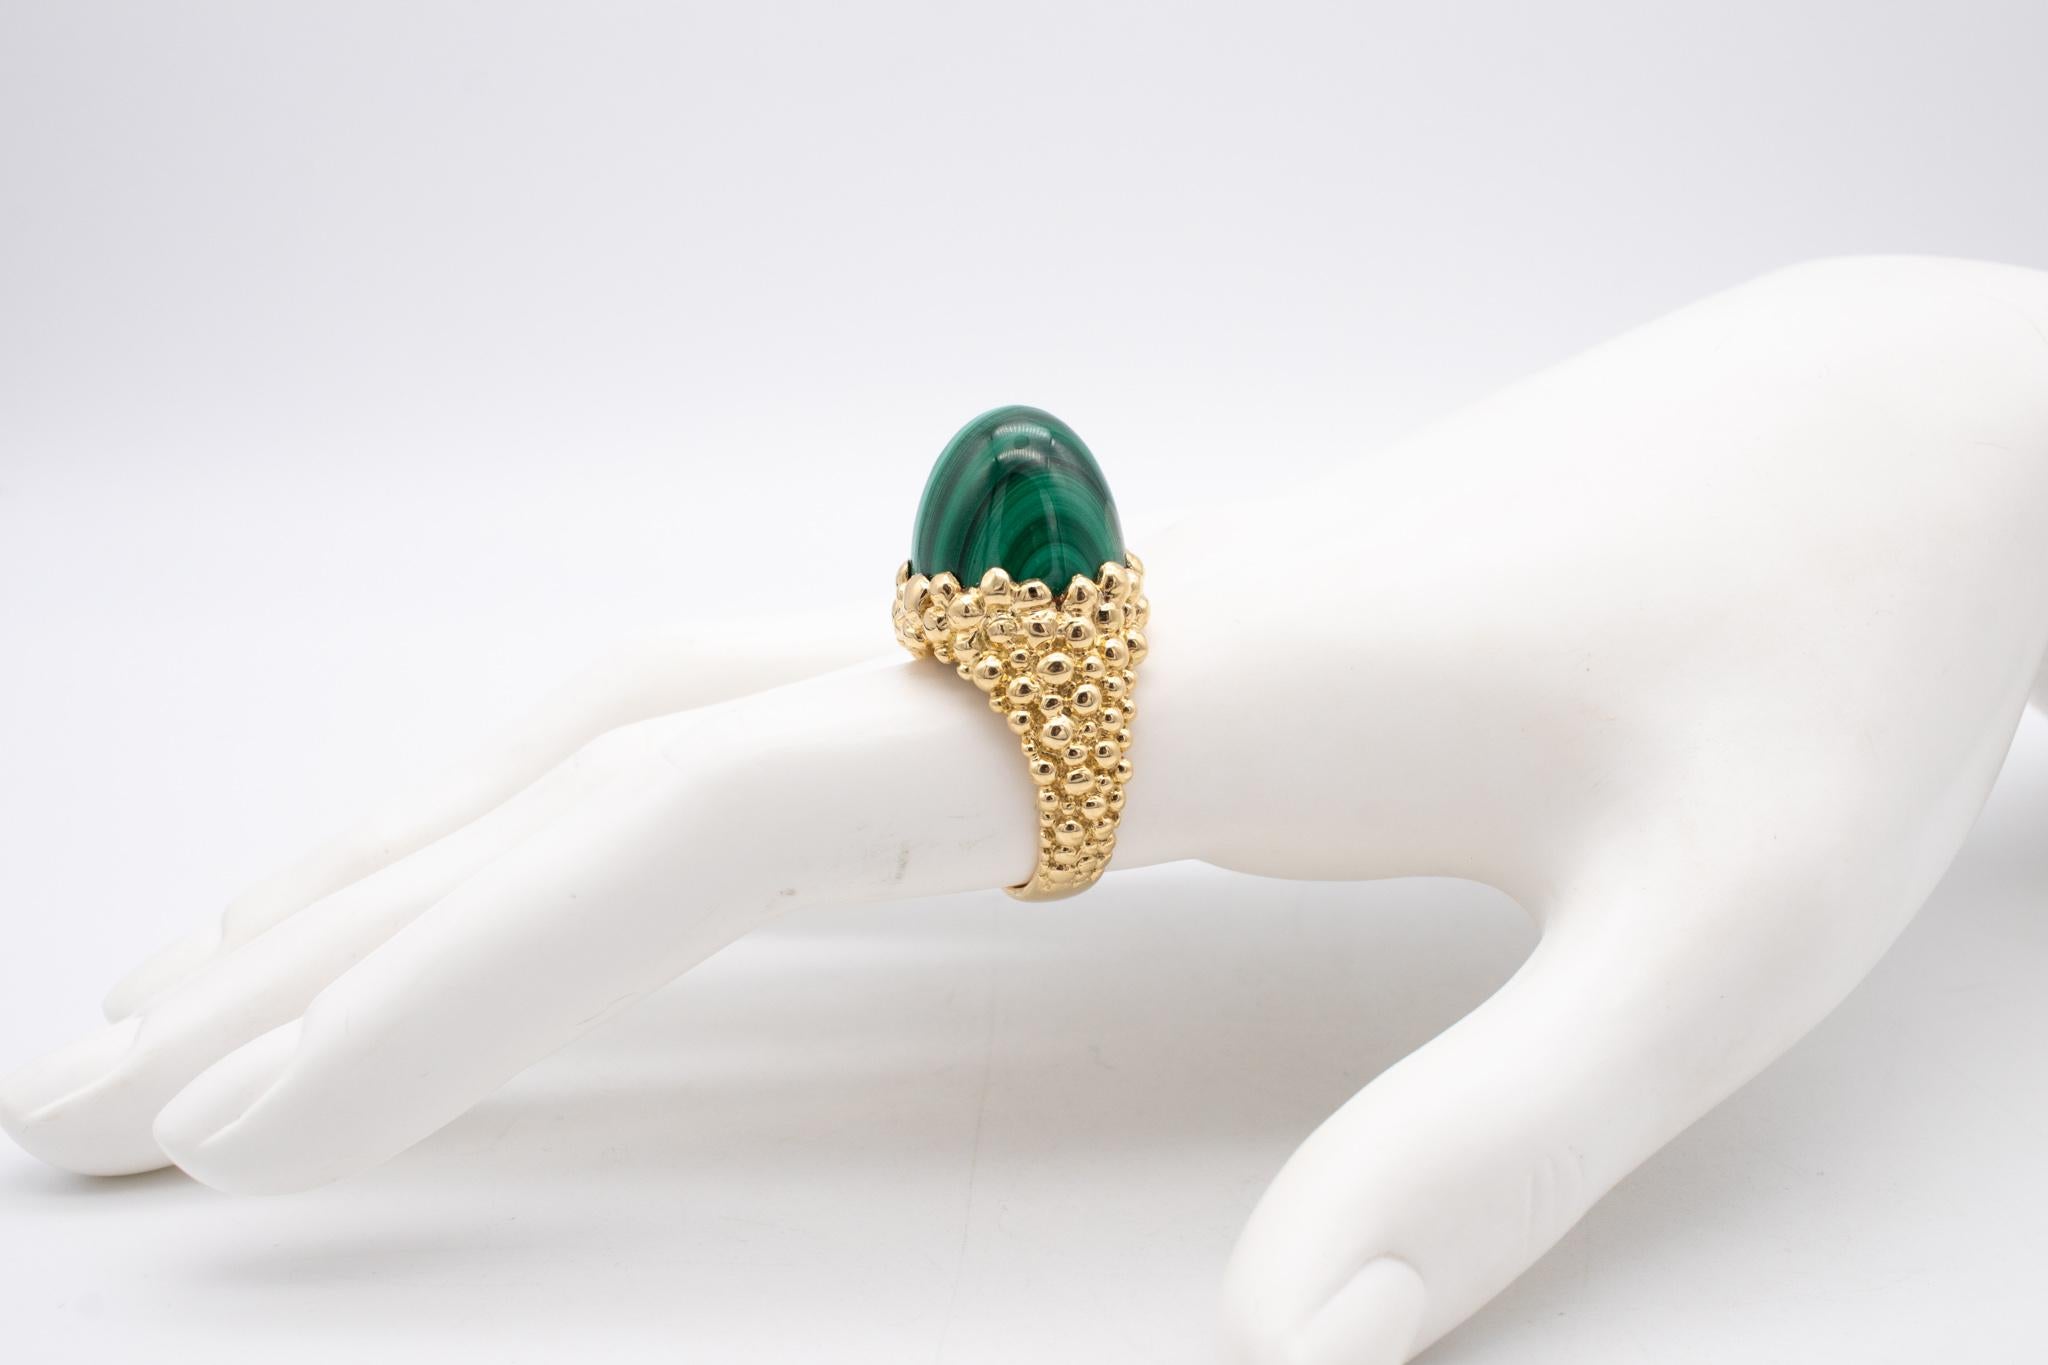 Cabochon Kutchinsky 1972 London 18kt Yellow Gold Retro Cocktail Ring with Malachite For Sale